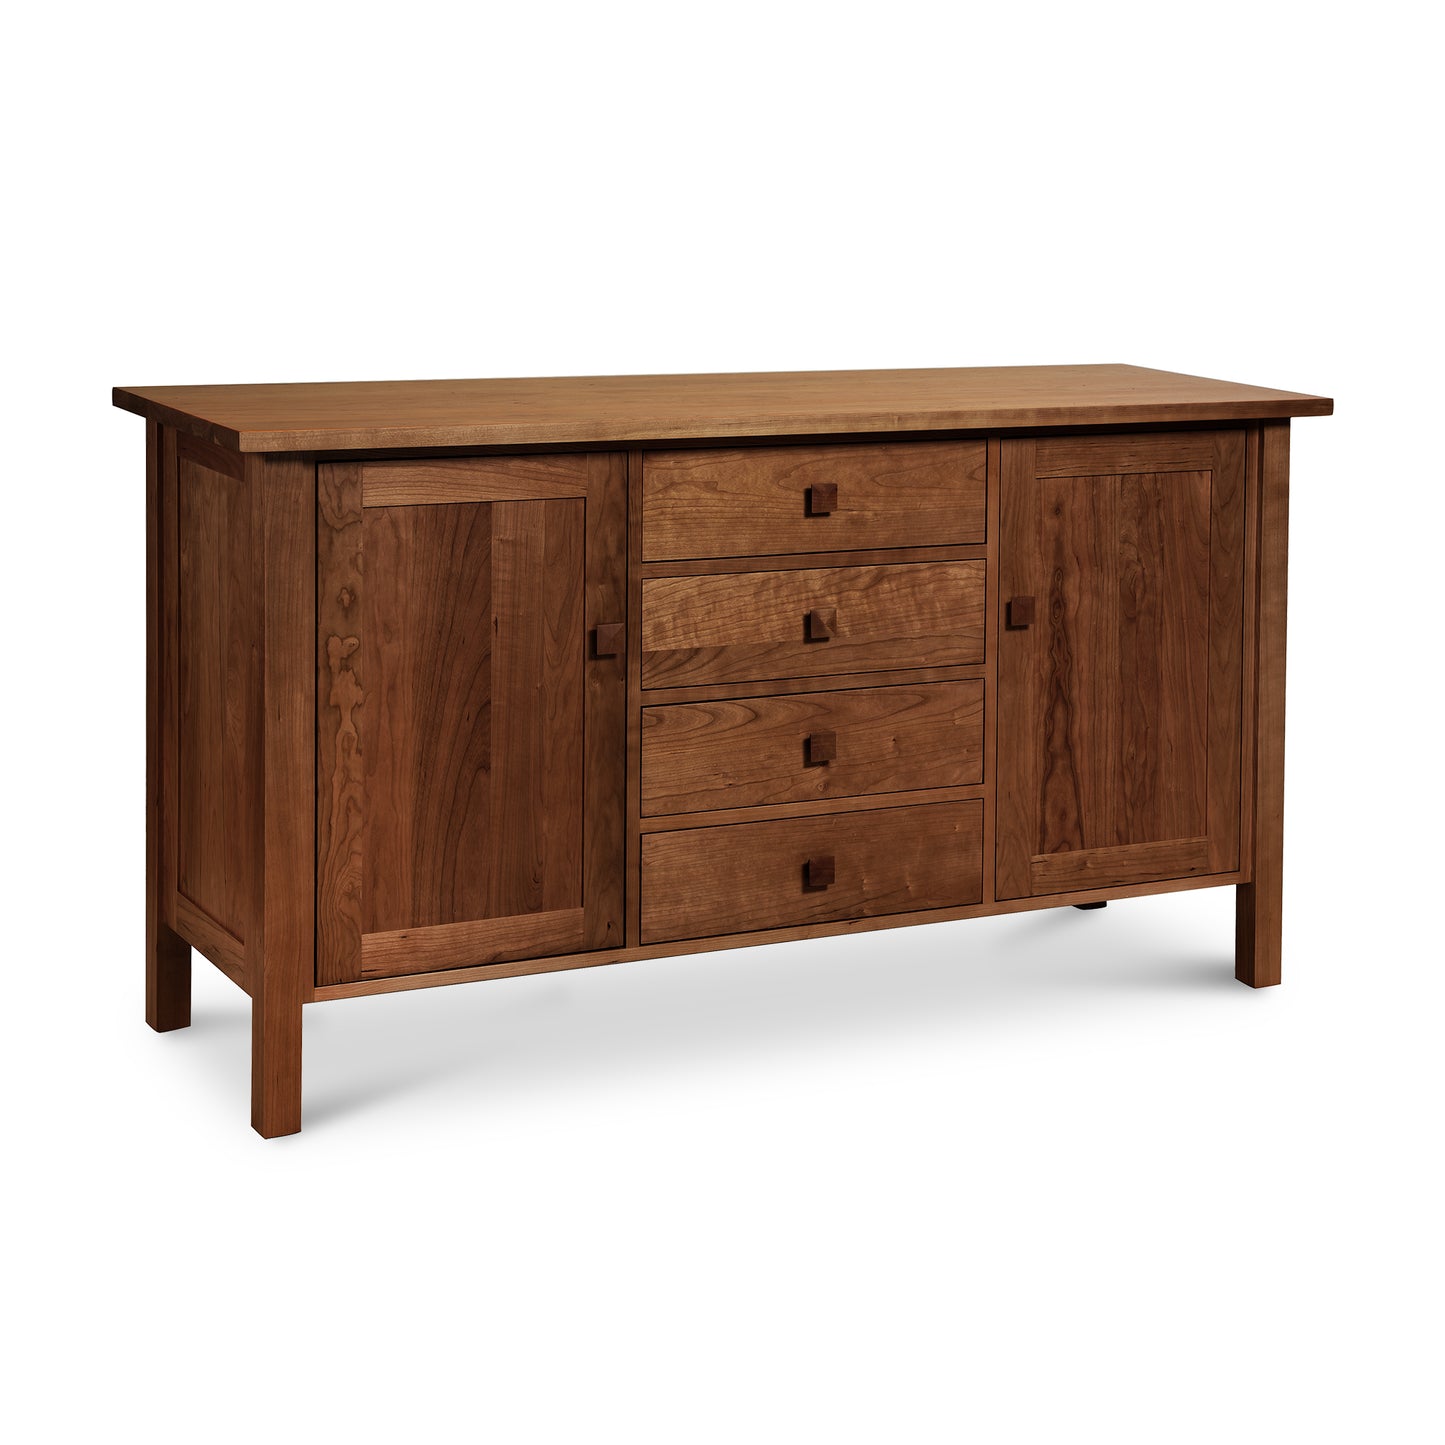 A Lyndon Furniture contemporary Modern Mission sideboard-buffet with handmade drawers.